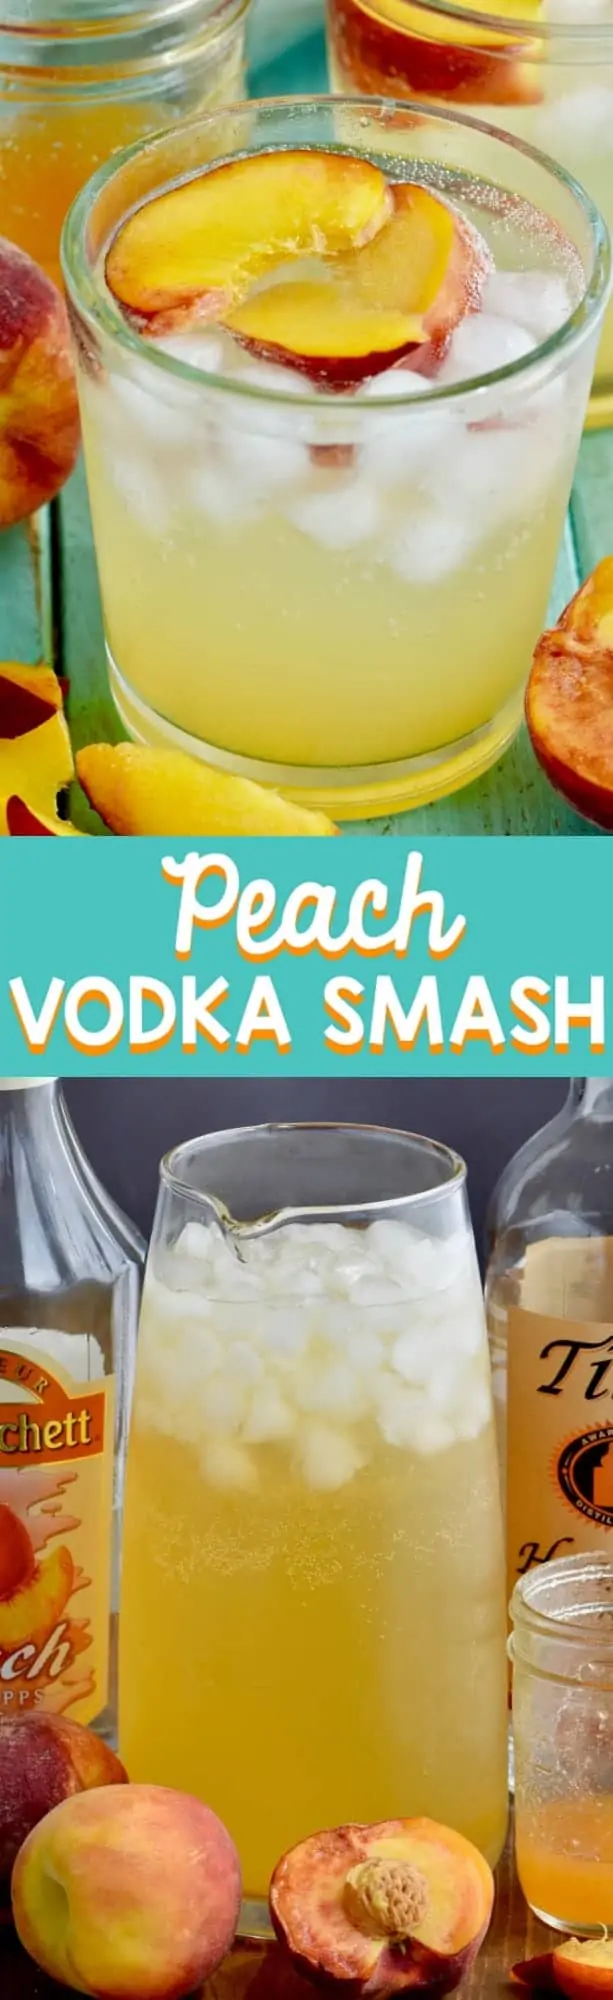 In a clear glass, the Peach Vodka Smash has two sliced peaches with ice. 